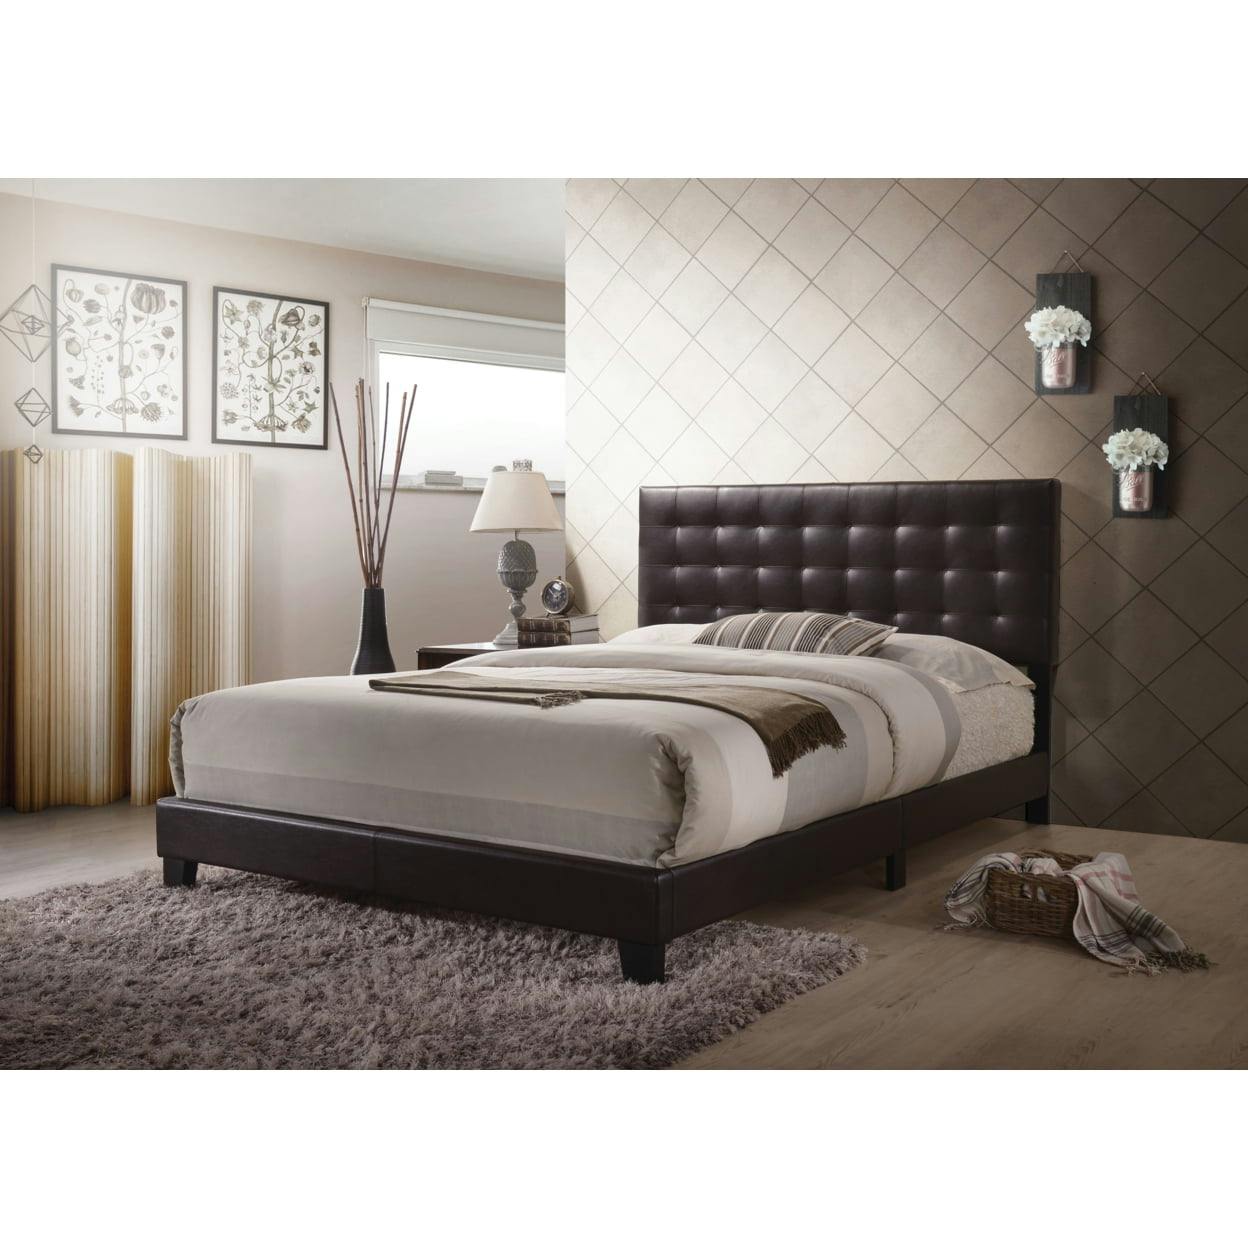 Espresso Faux Leather Tufted Queen Bed with Wood Frame